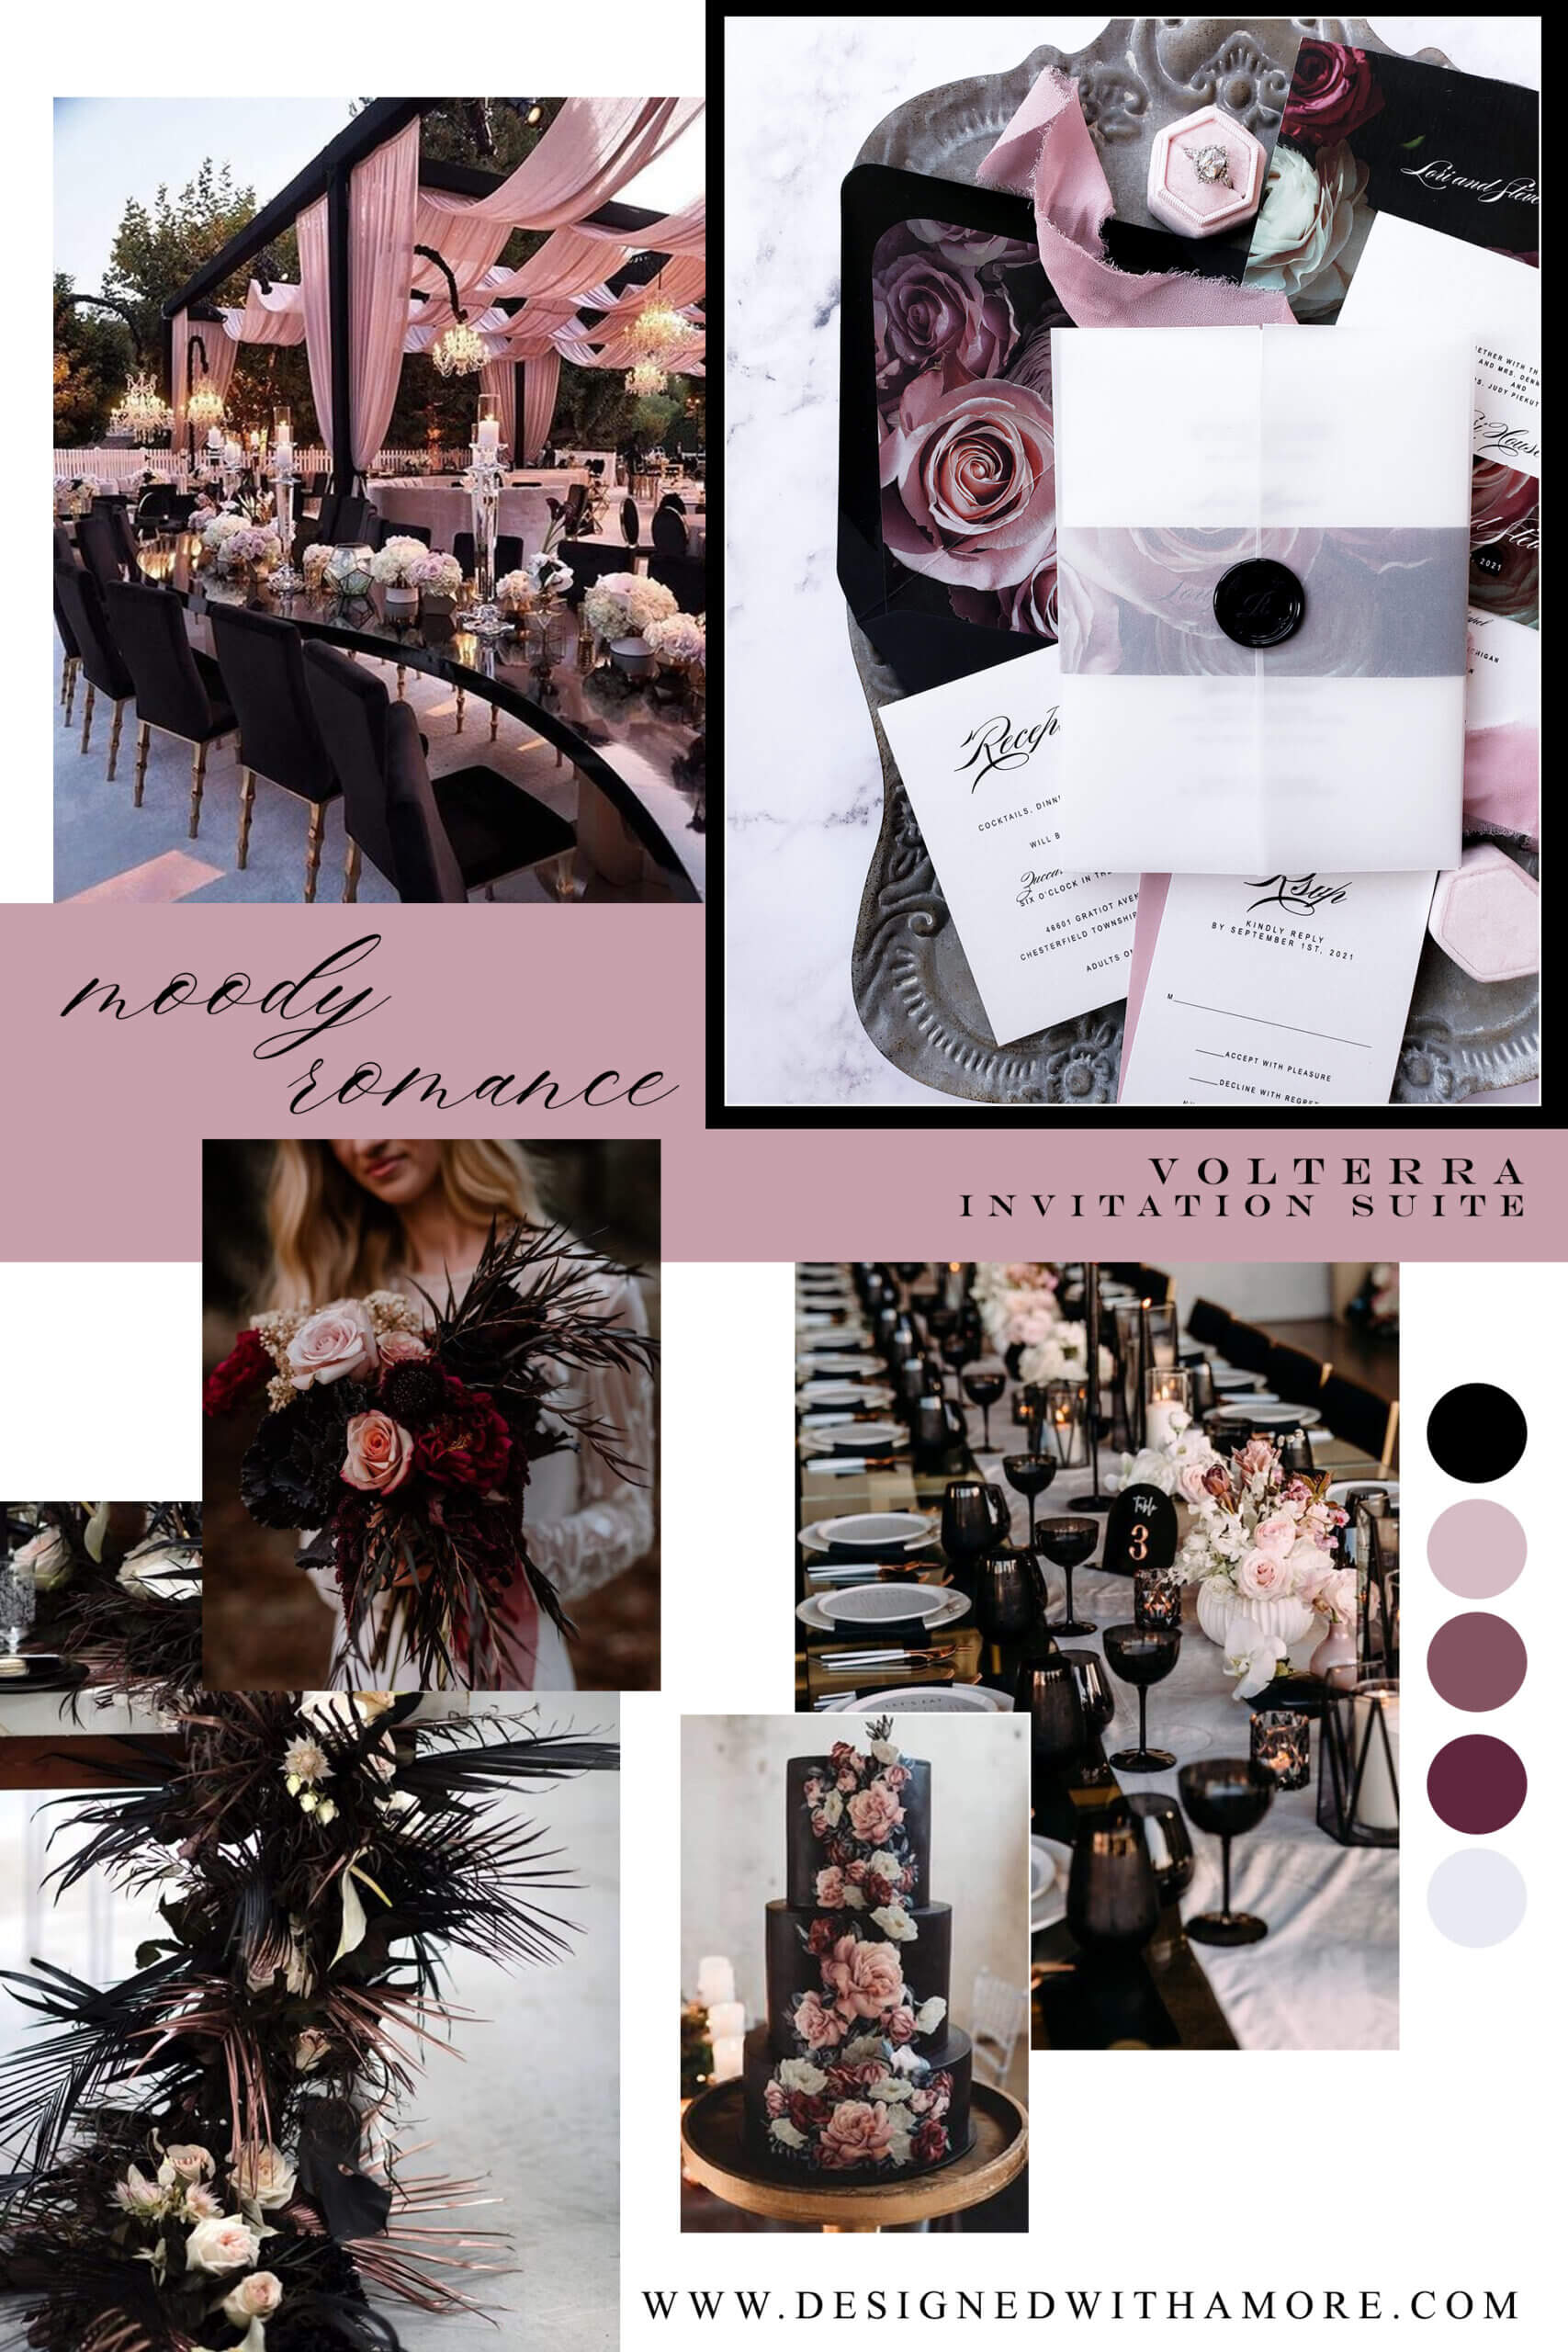 A black and pink wedding venue